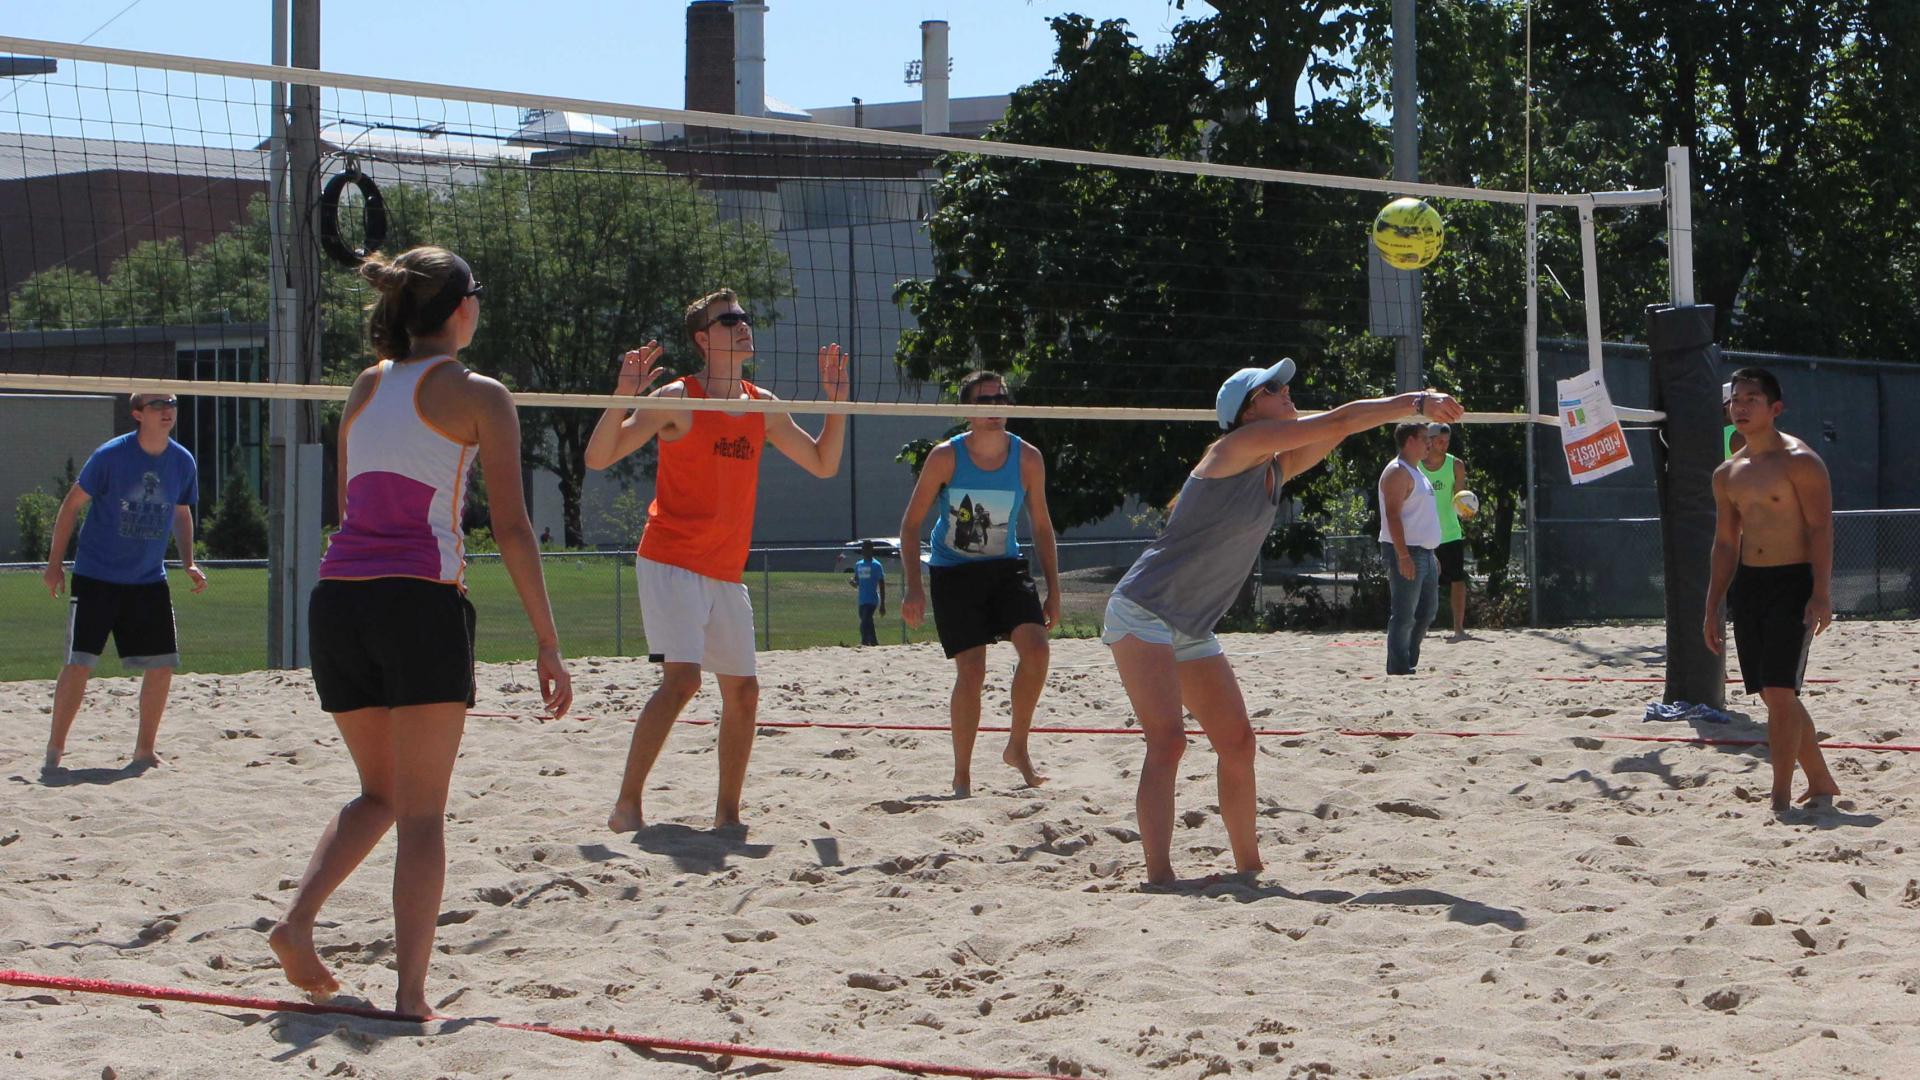 Students play intramural sand volleyball